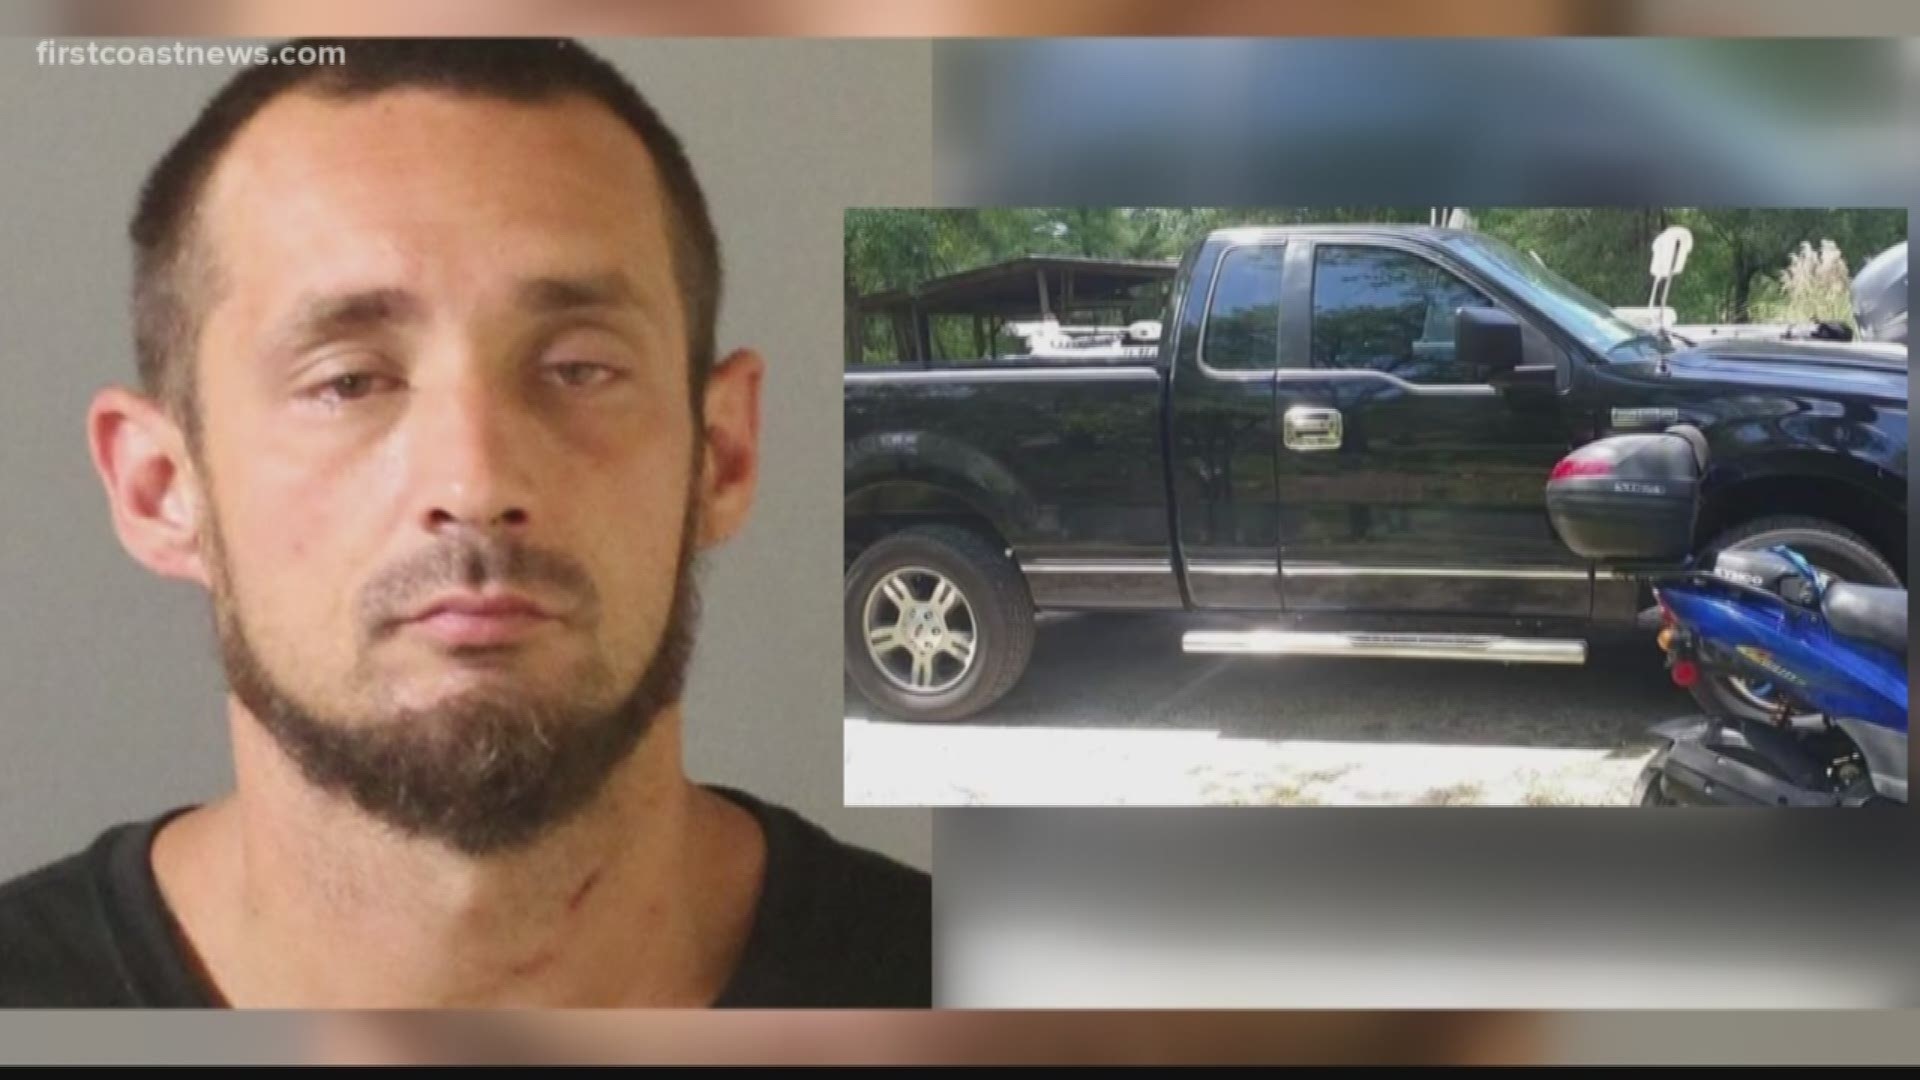 The man found driving Jeniffer Perry's truck after her disappearance, 33-year-old Delbert Goodman is facing a new charge of Concealing the Death of Another Person.